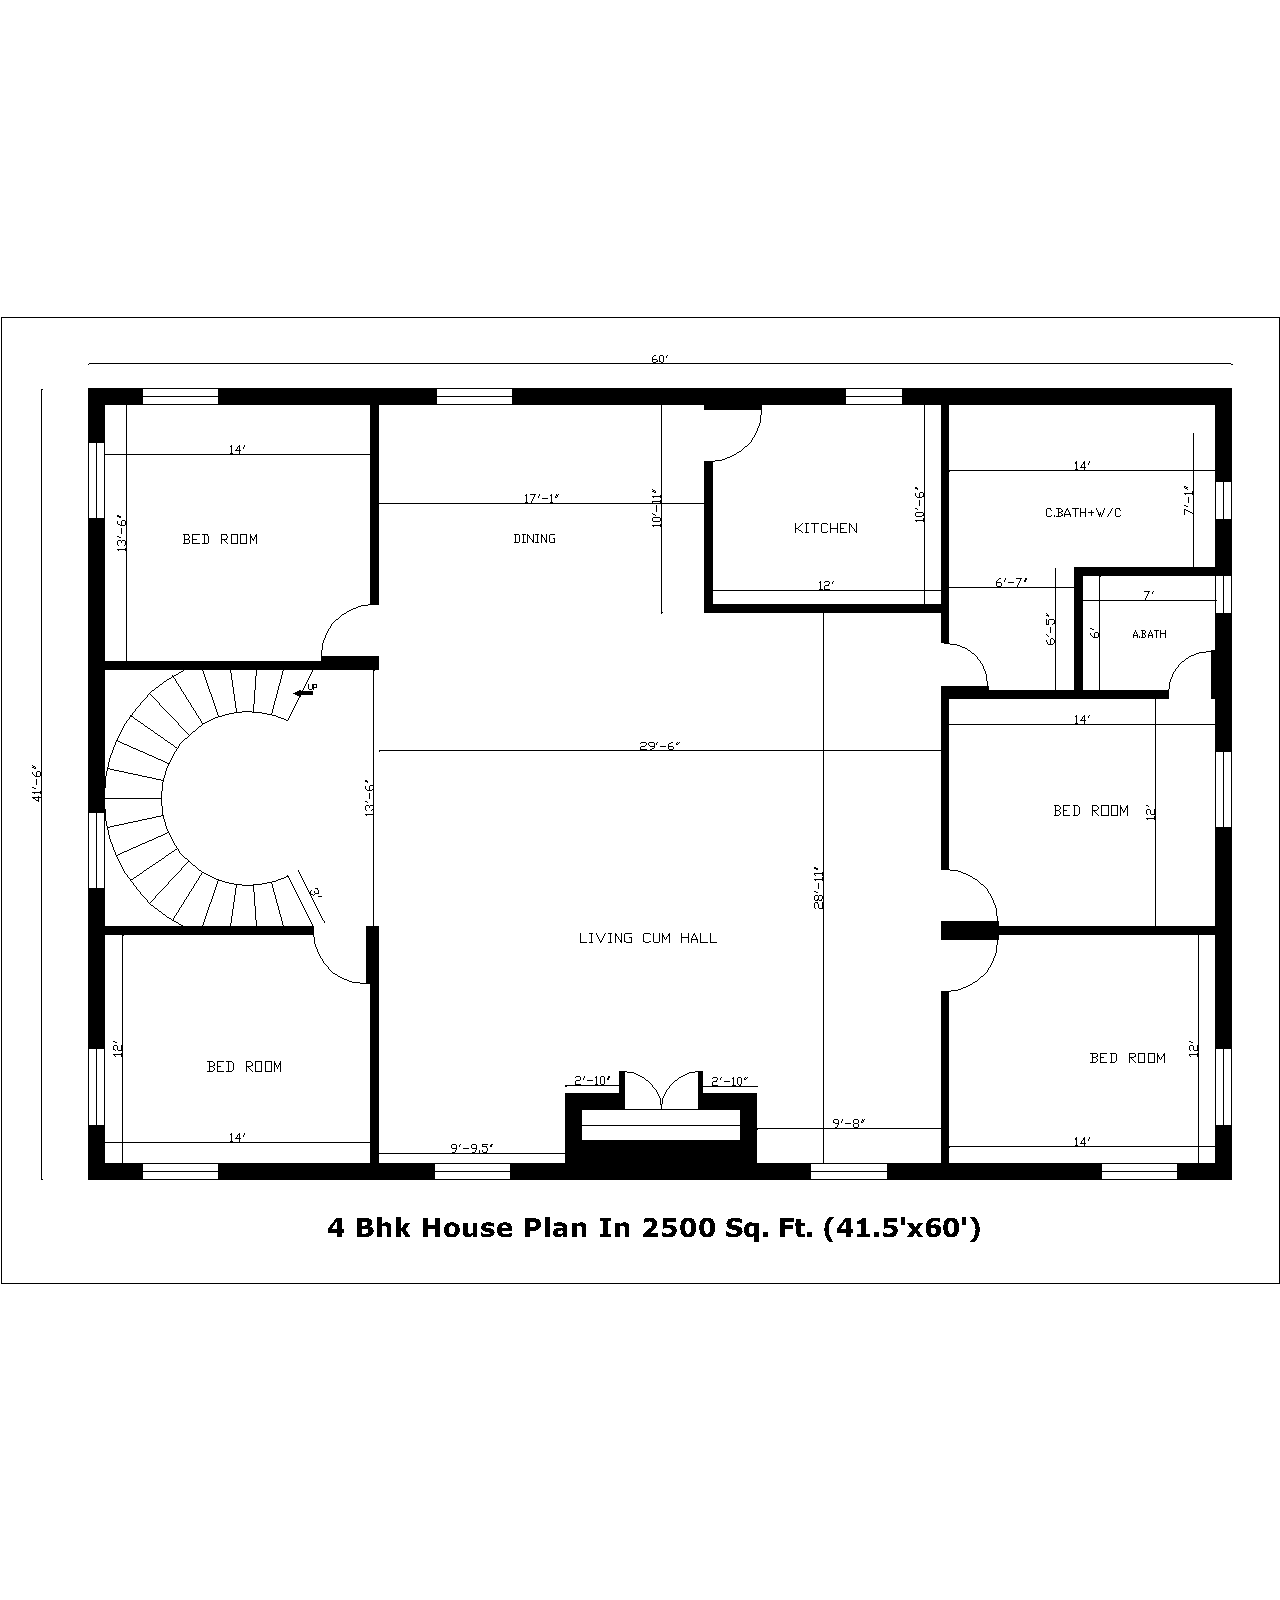 4 Bhk House Plan In 2500 Sq. Ft. (41.5'x60')